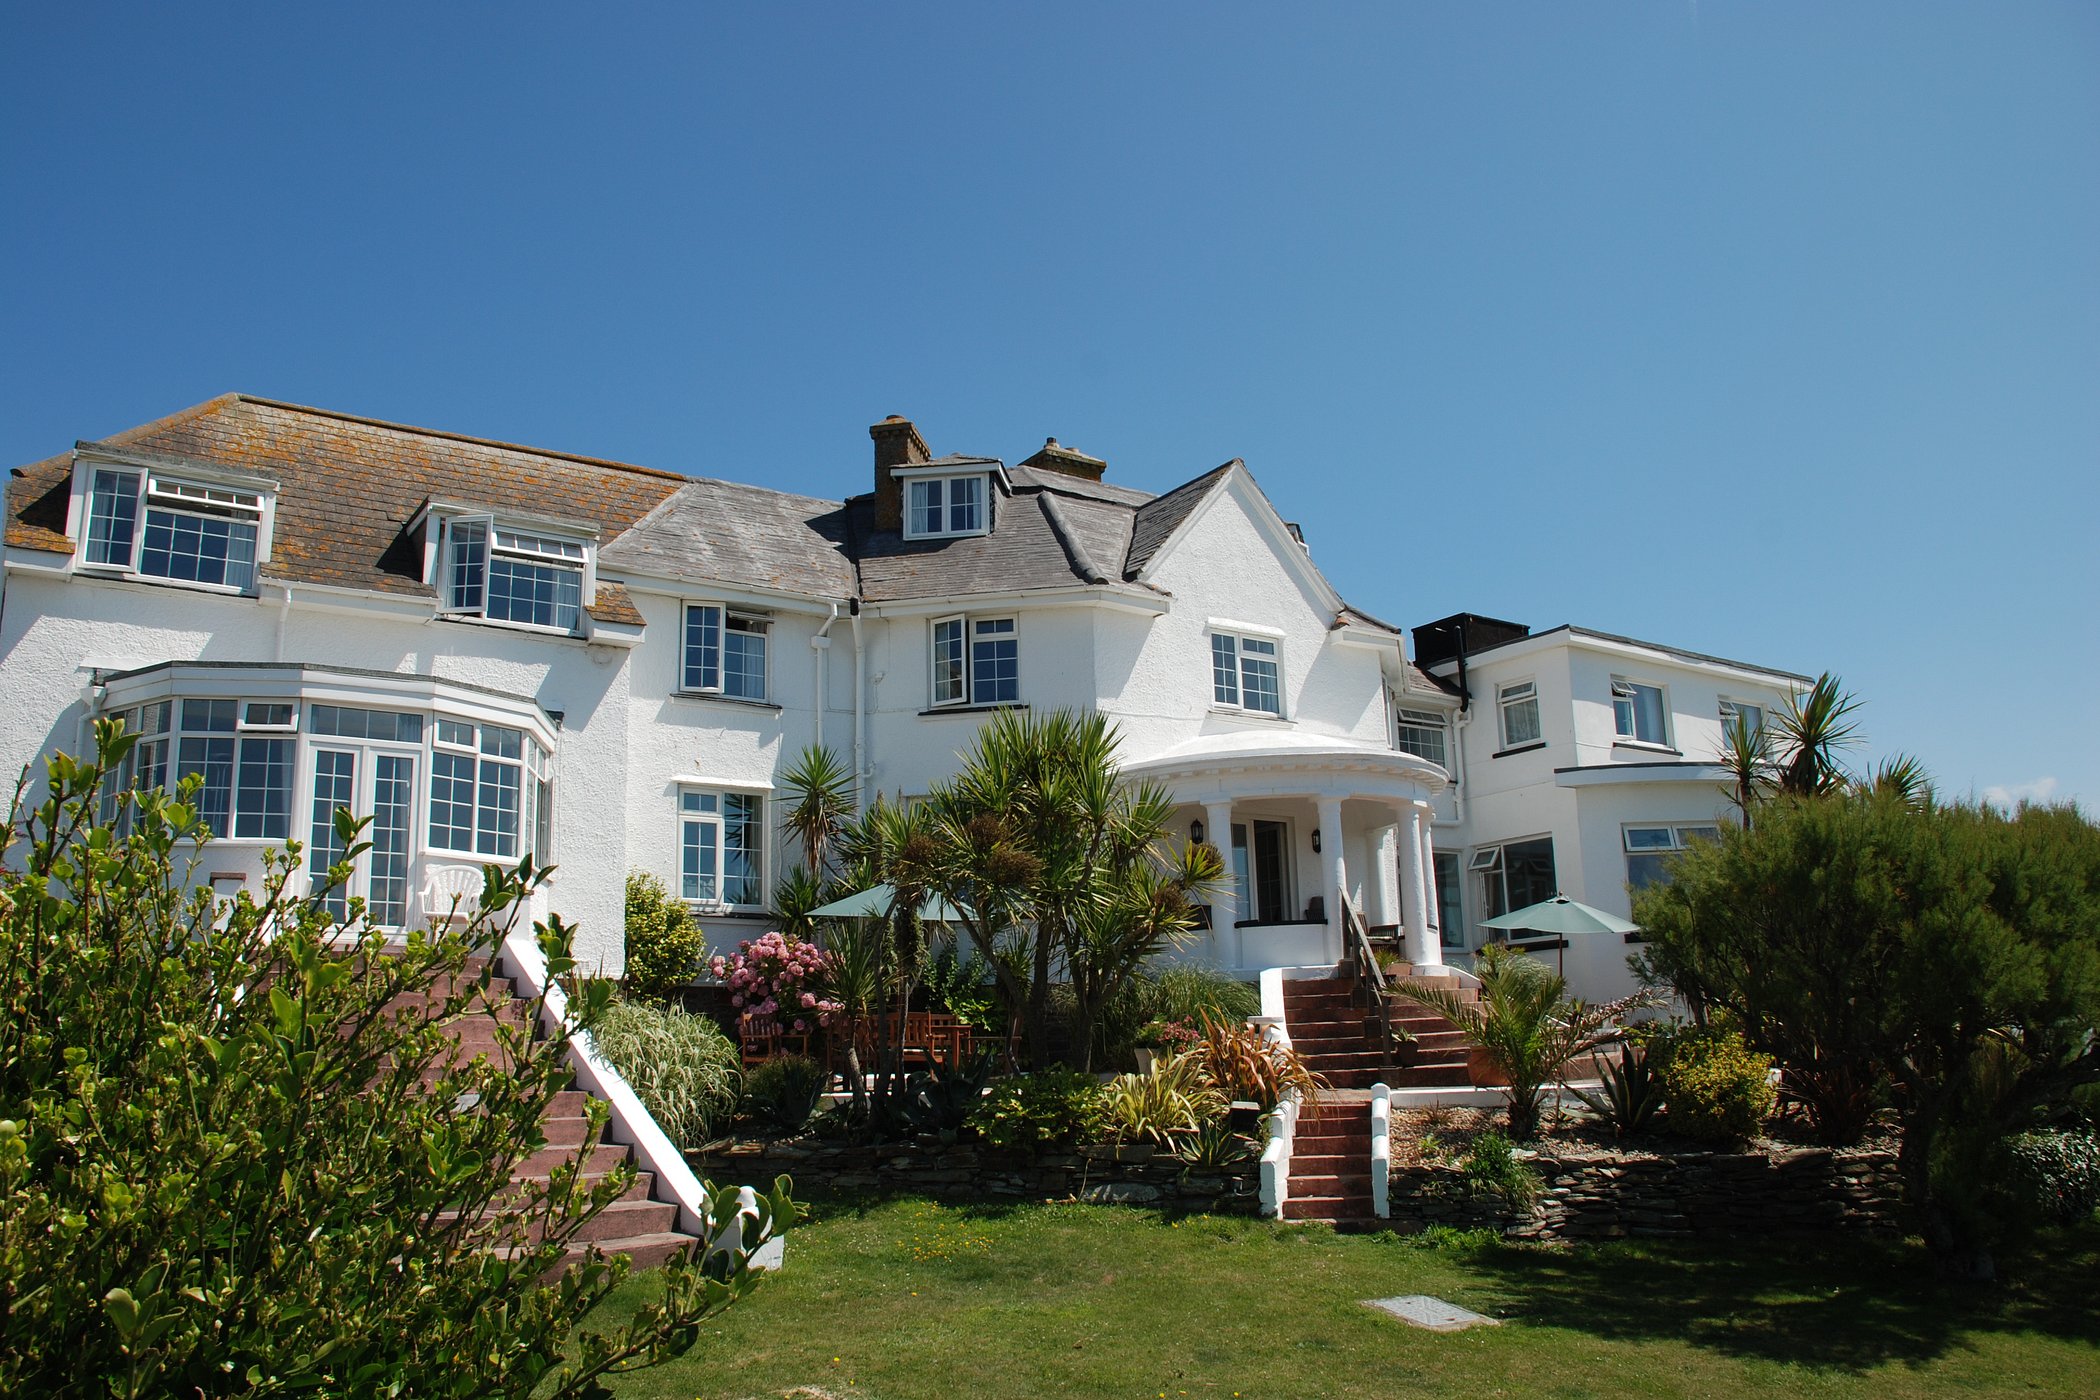 Whipsiderry Hotel. Newquay Cornwall image